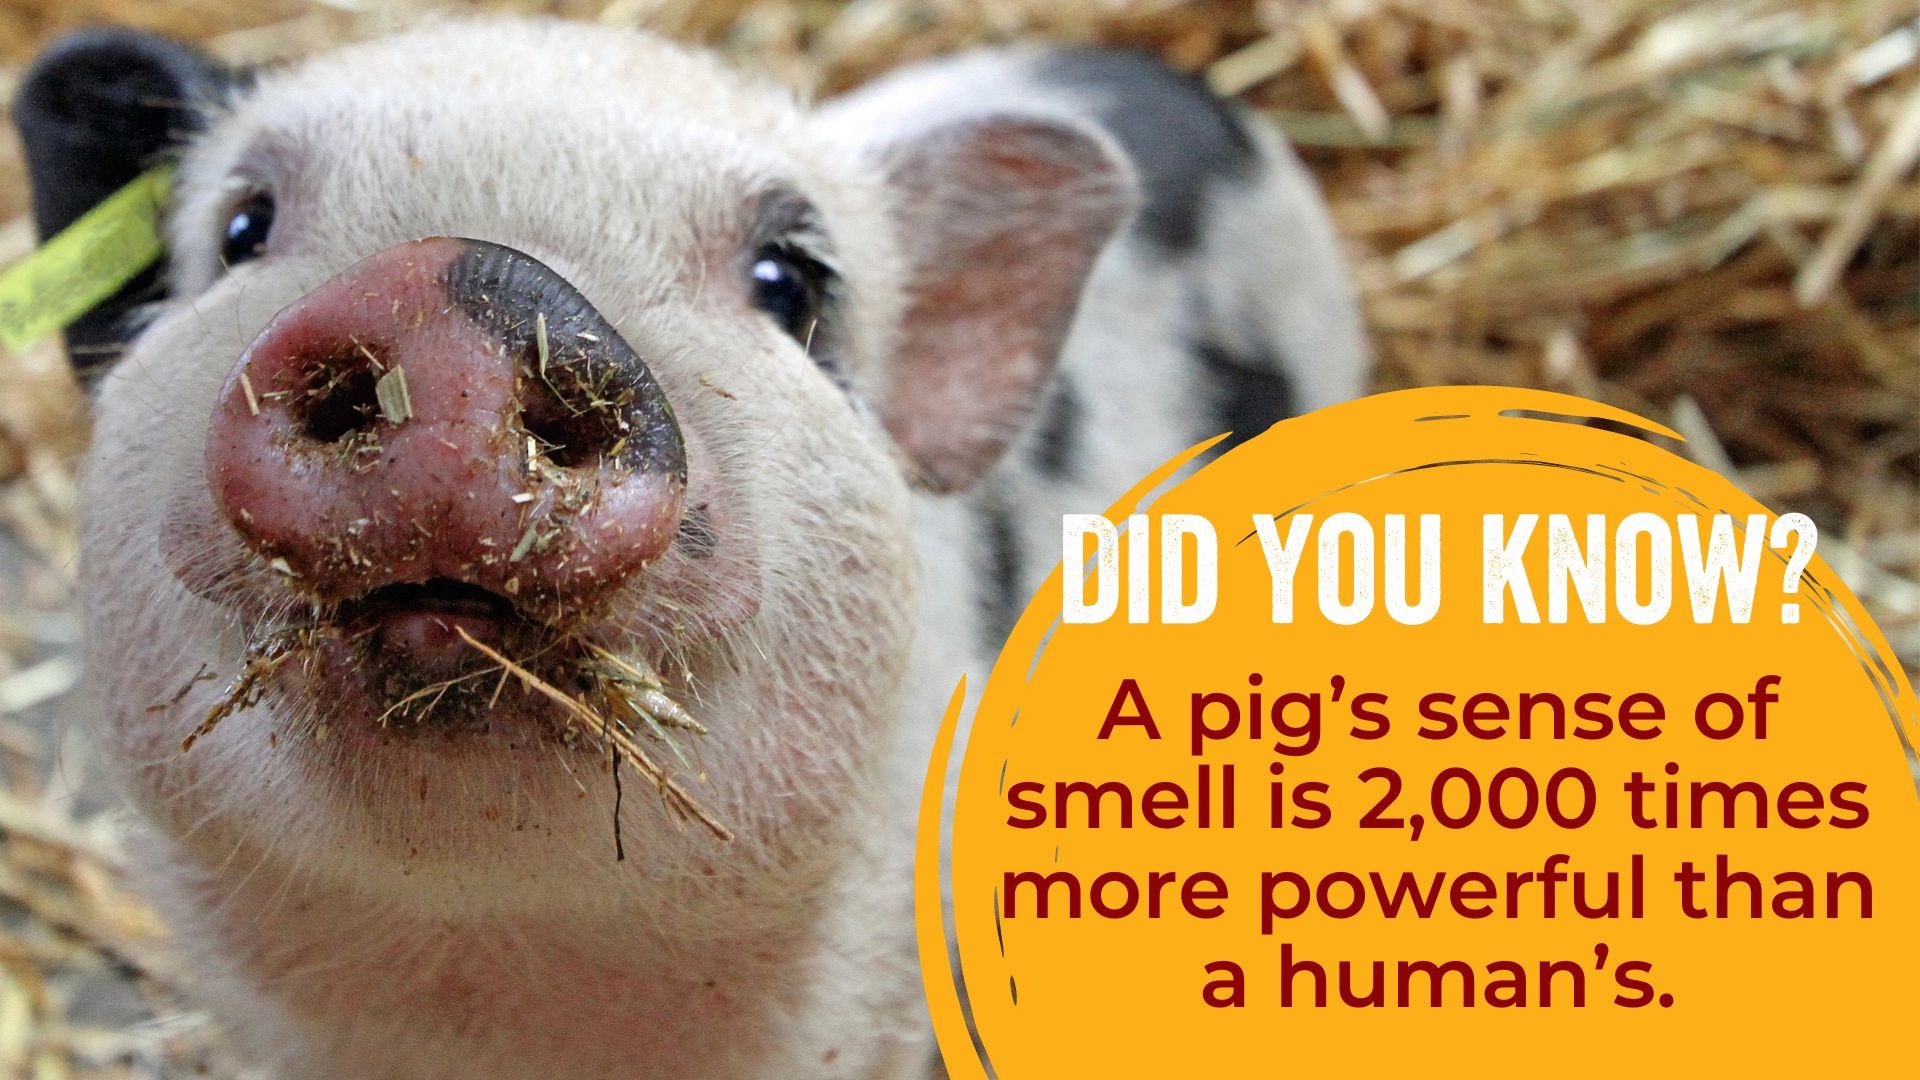 A pig’s sense of smell is 2,000 times more powerful than a human’s.